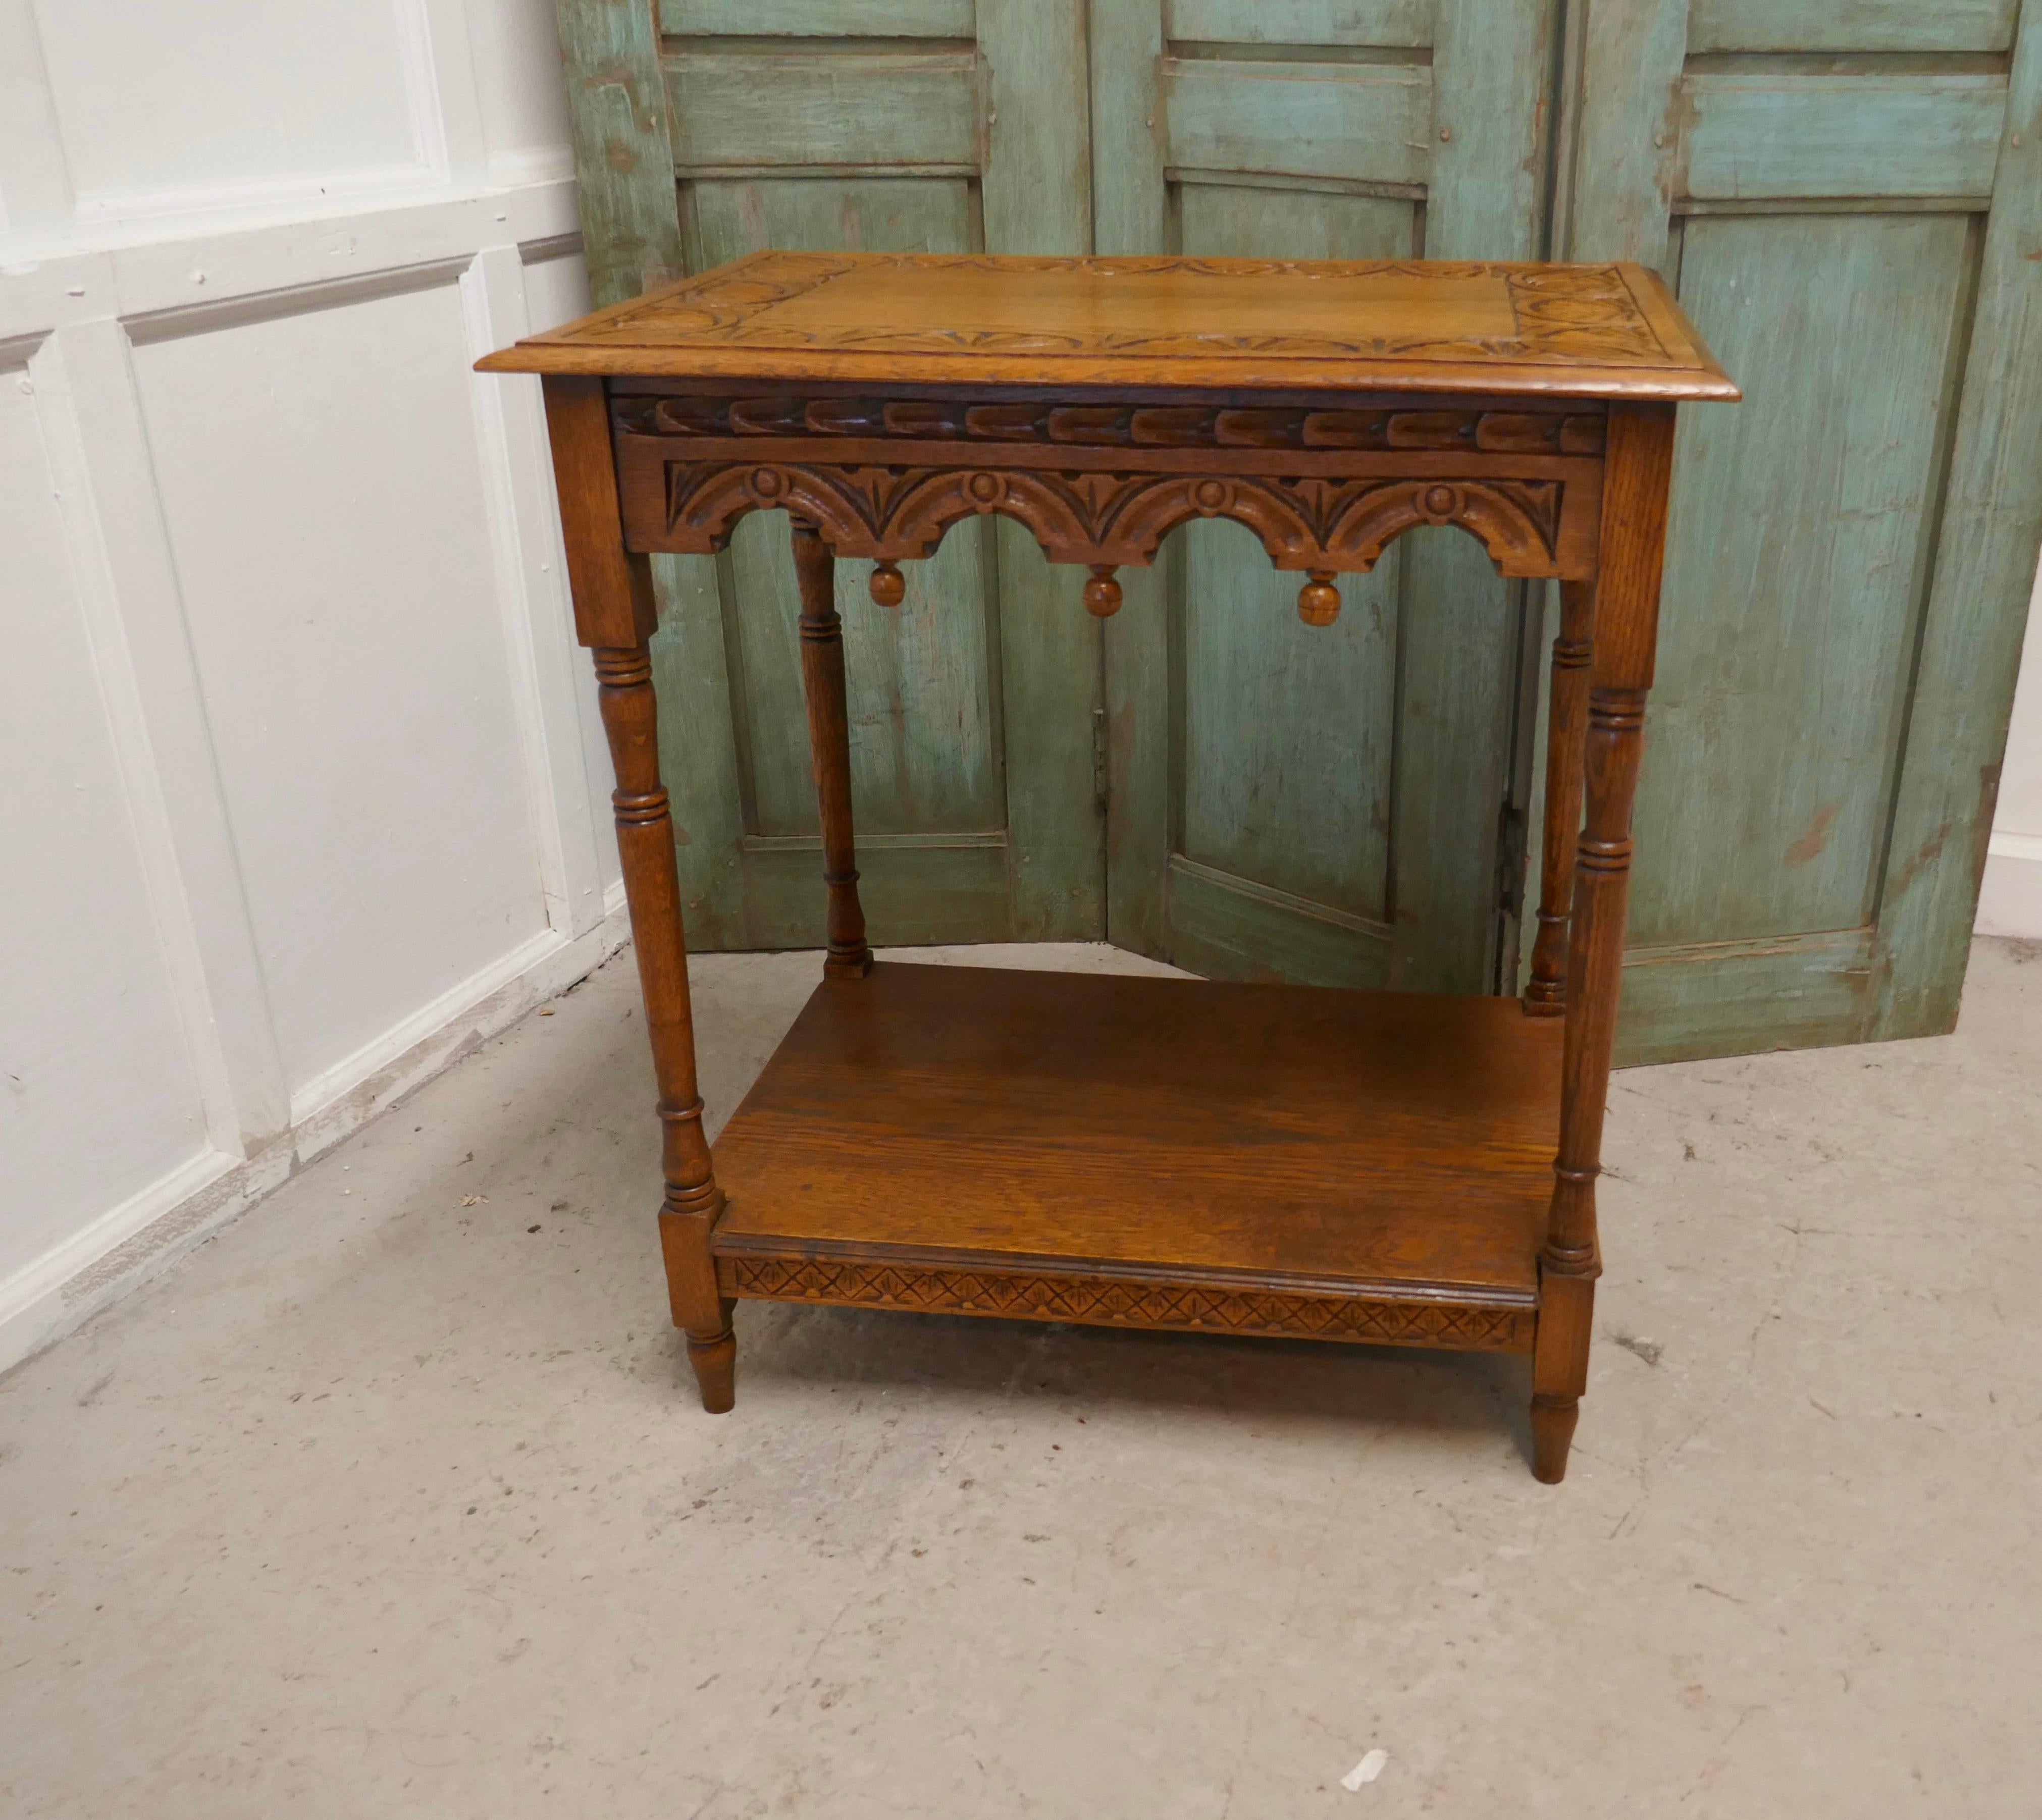 Late Victorian golden oak carved occasional side table

This is a superb quality piece made circa 1900, with carved top and apron and an under tier, standing on turned legs

A Really elegant table with a bright color and a lovely patina, in good